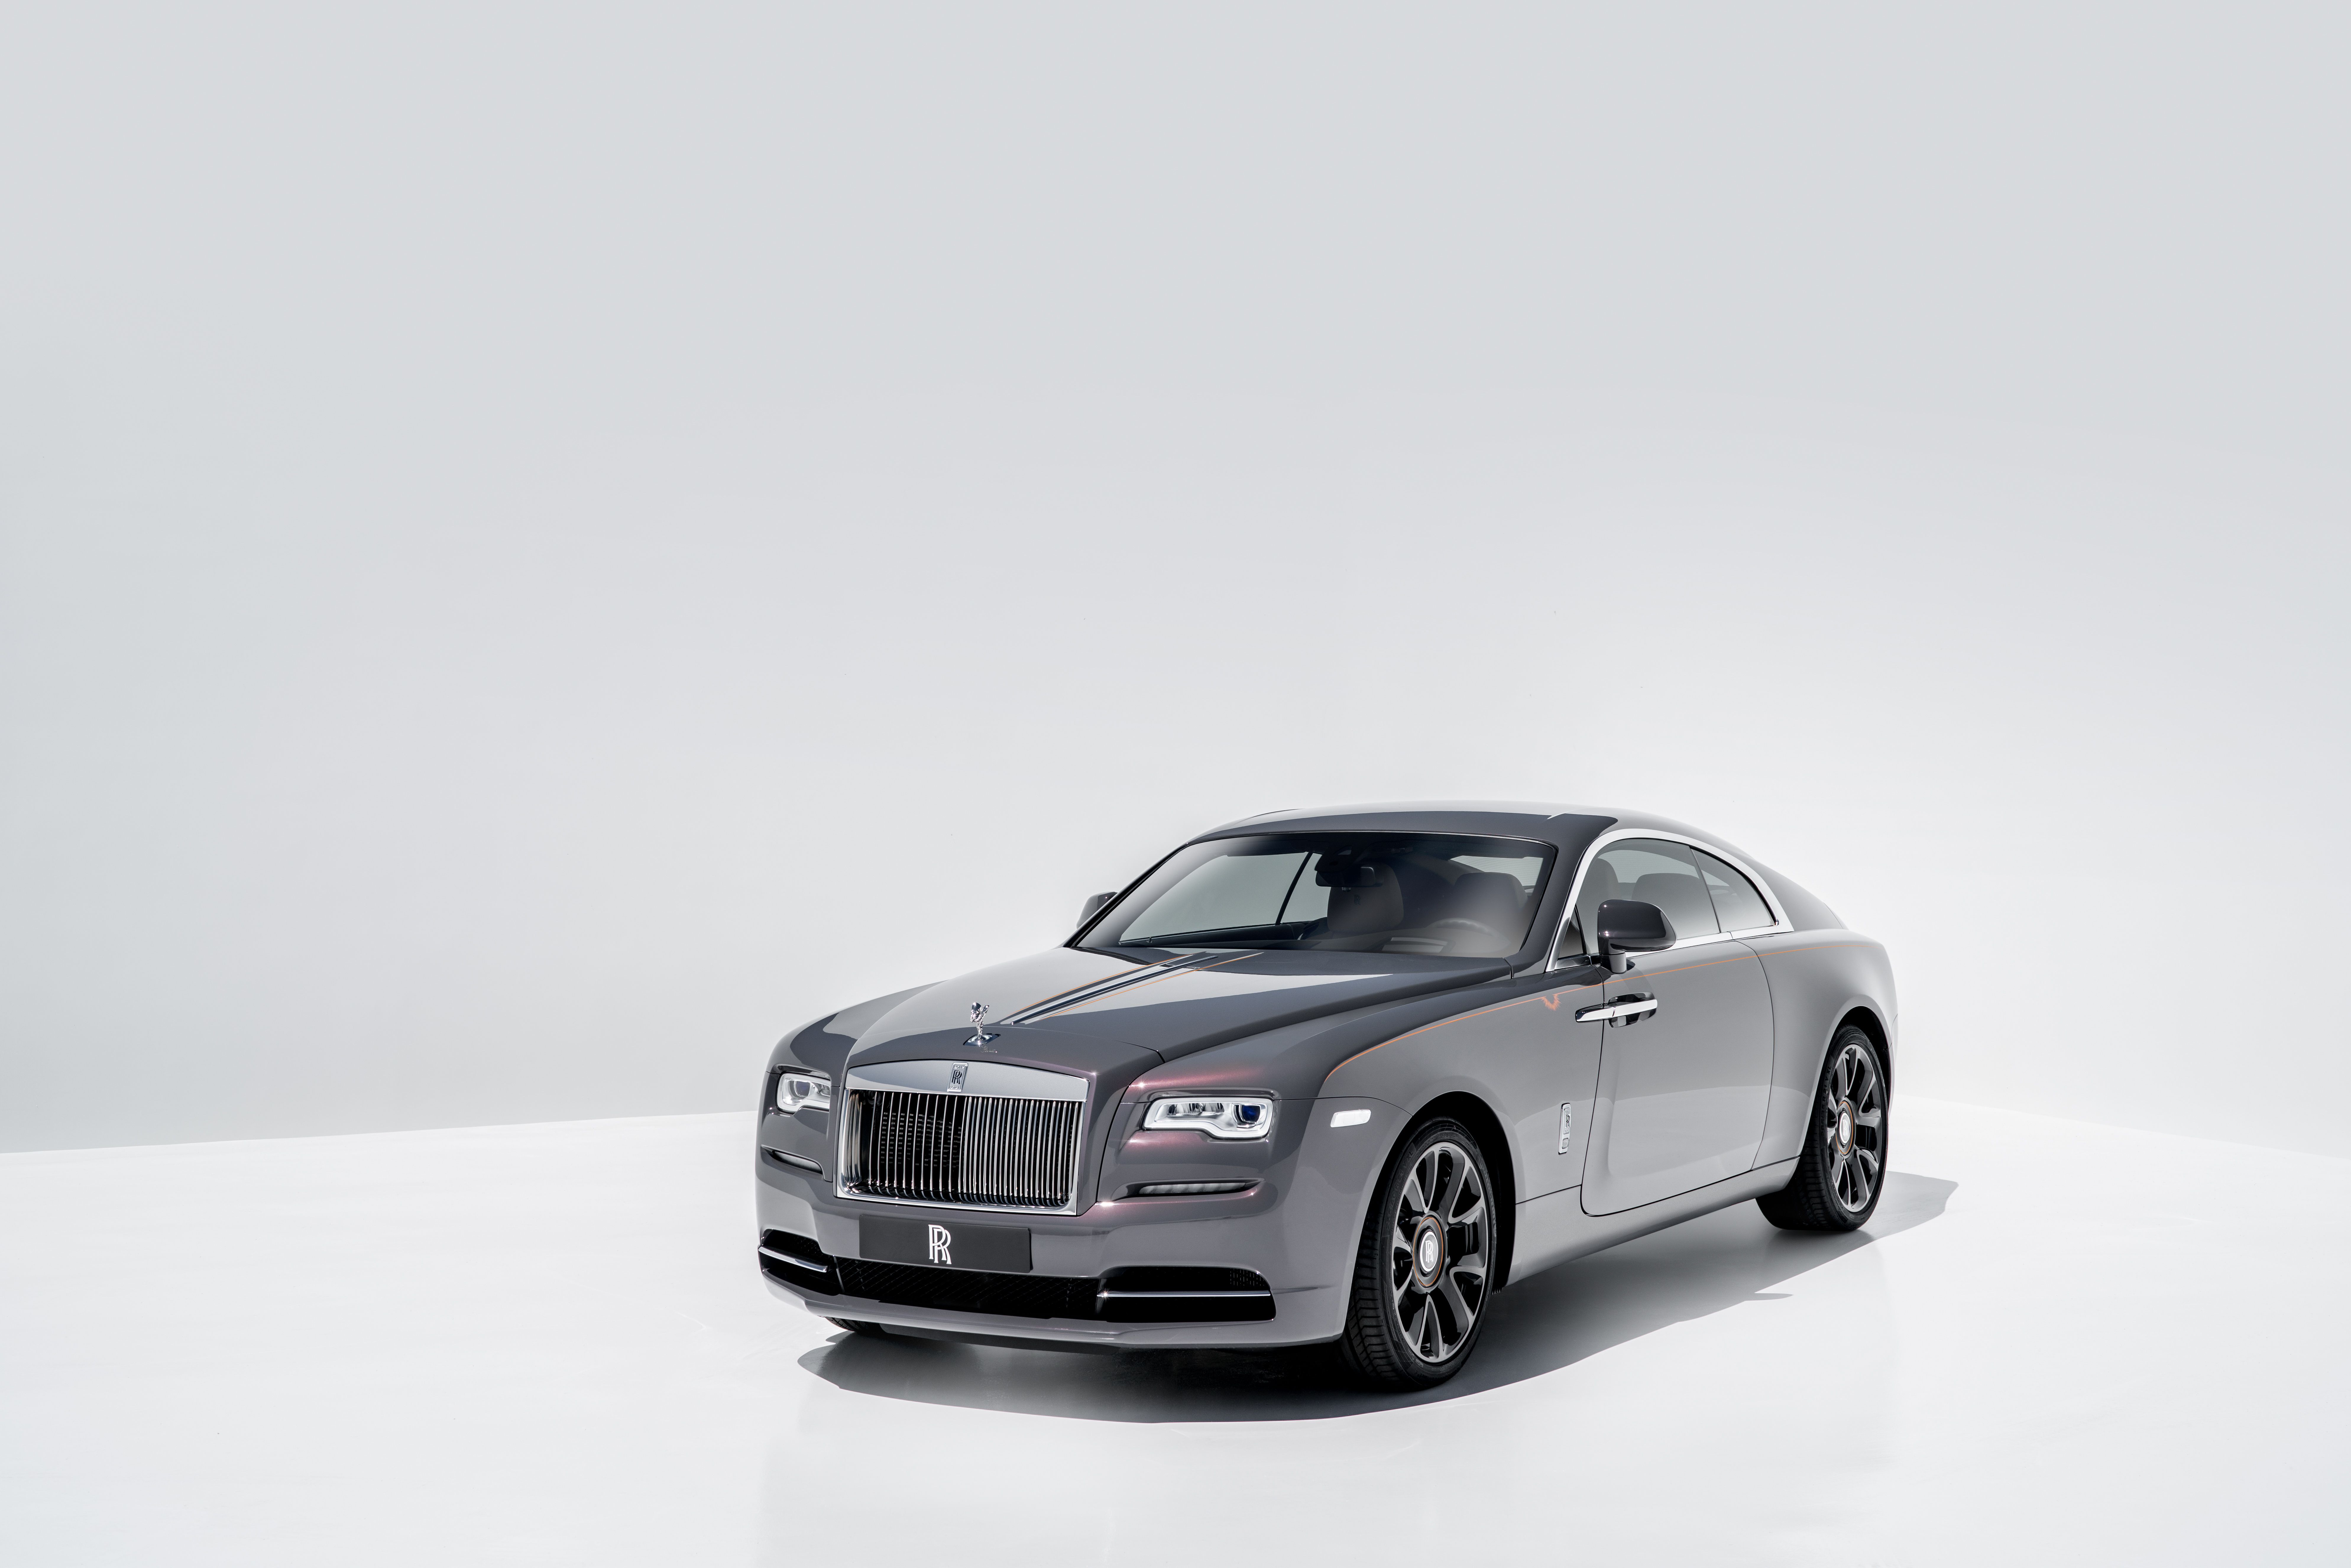 2017 Rolls Royce Wraith Lease 3288 Per Month  Below Invoice